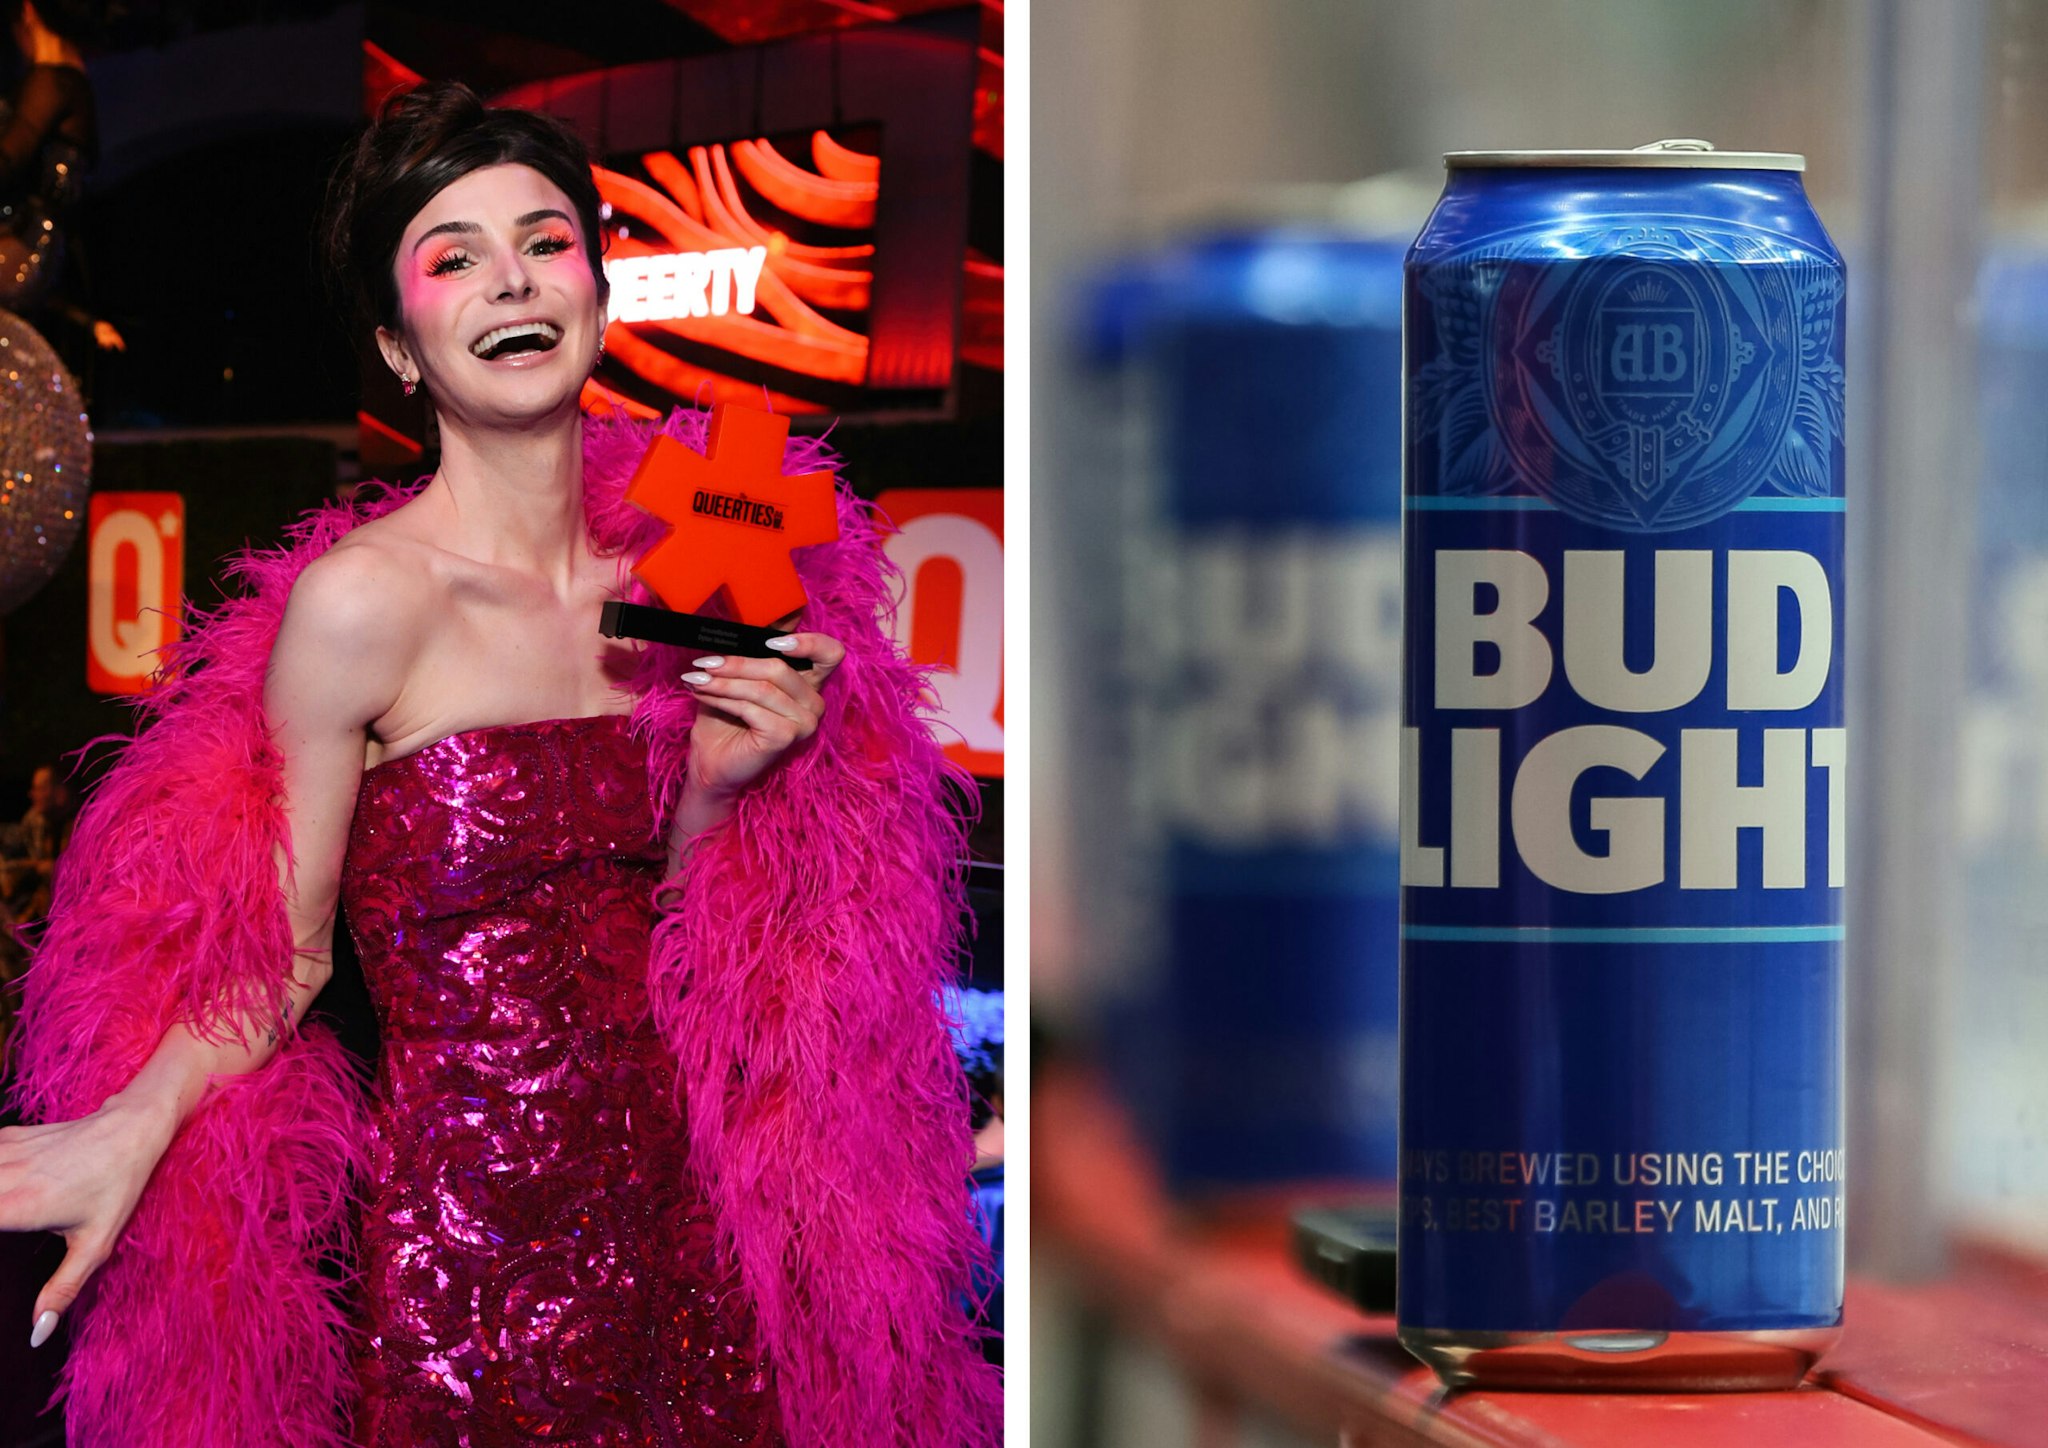 Bud Light Takes Another Rankings Hit Amid Continued Fallout From Dylan